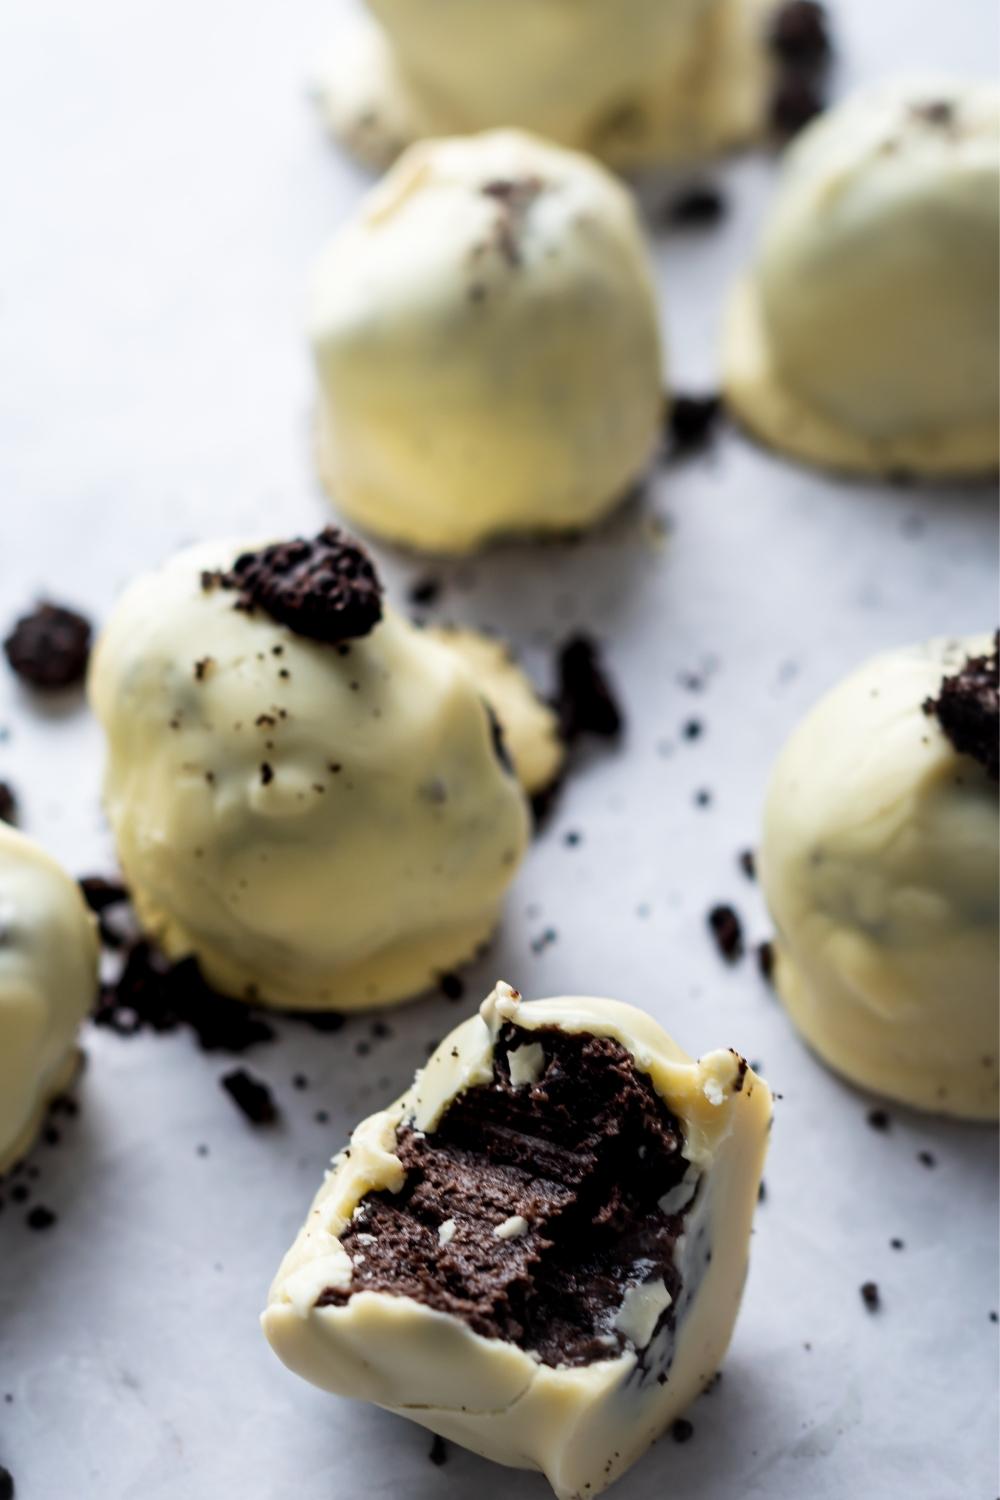 A close up of oreo balls on parchment paper. Each oreo ball is dipped in white chocolate and topped with crumbled oreos. One oreo ball has a bite taken out of it.